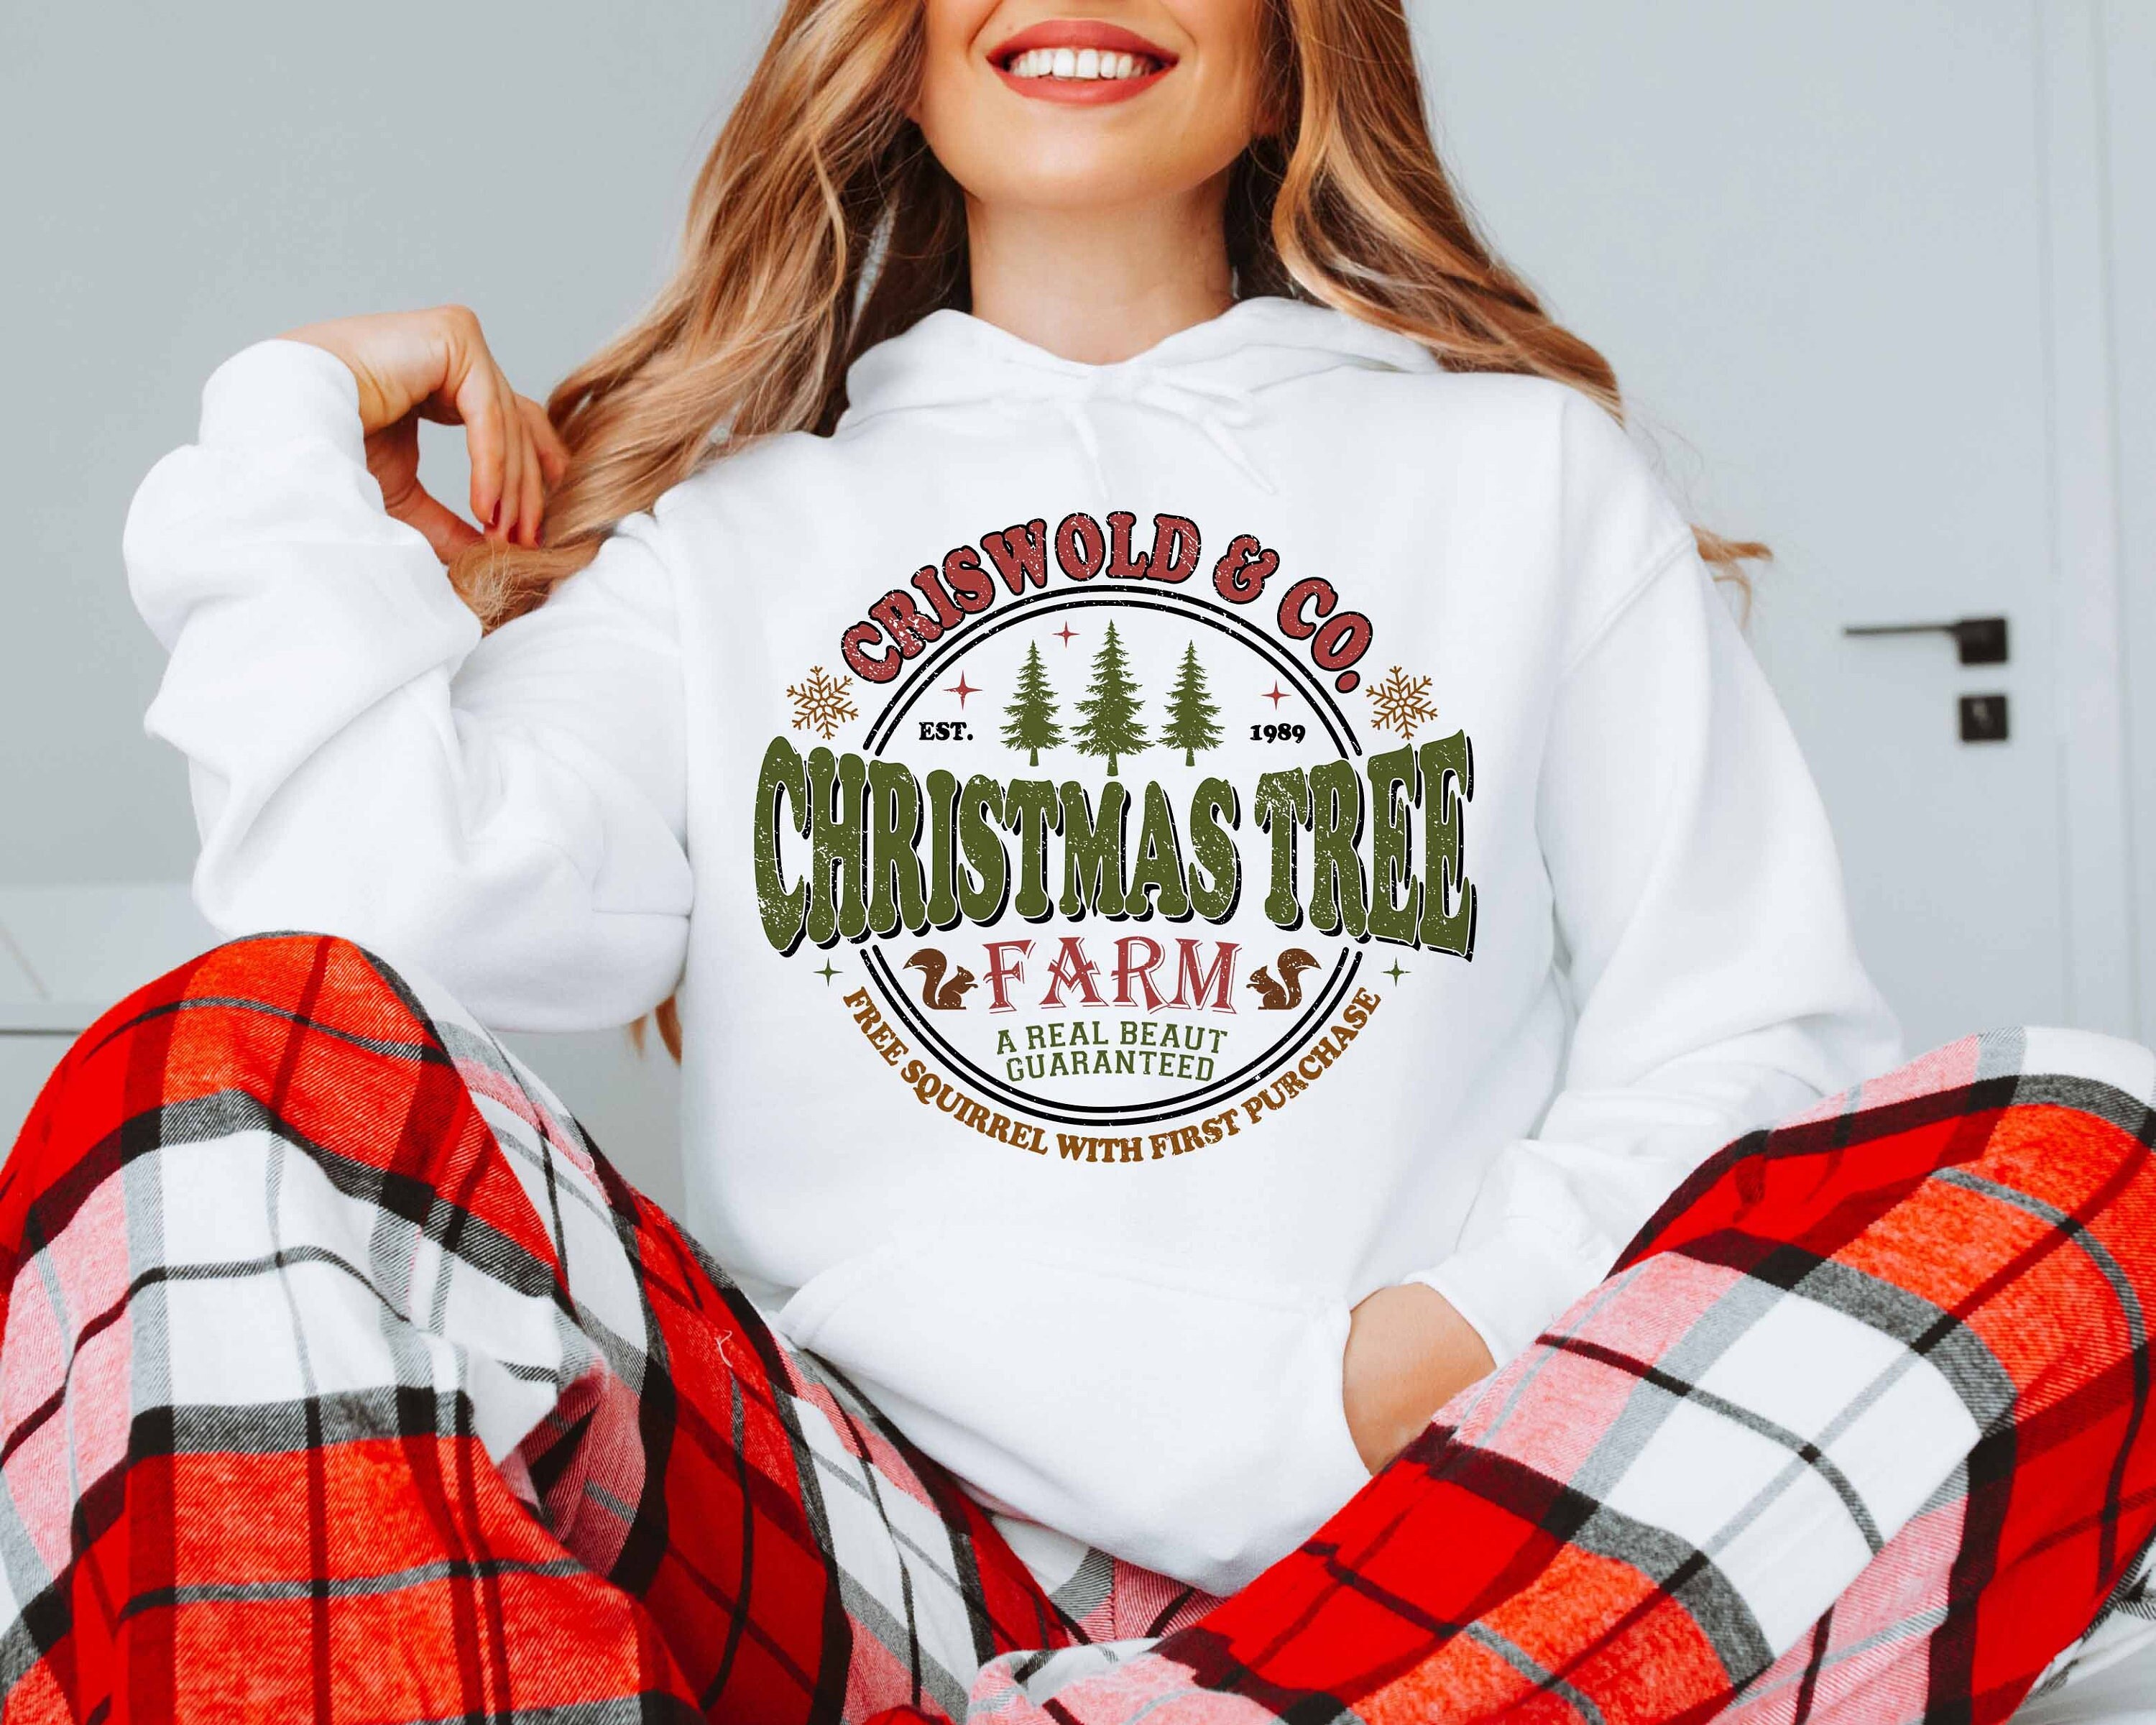 90s Clark Griswold 00 Movie Hockey Sweater Jersey Hip hop Jersey for X –  Ugly Christmas Sweater Party